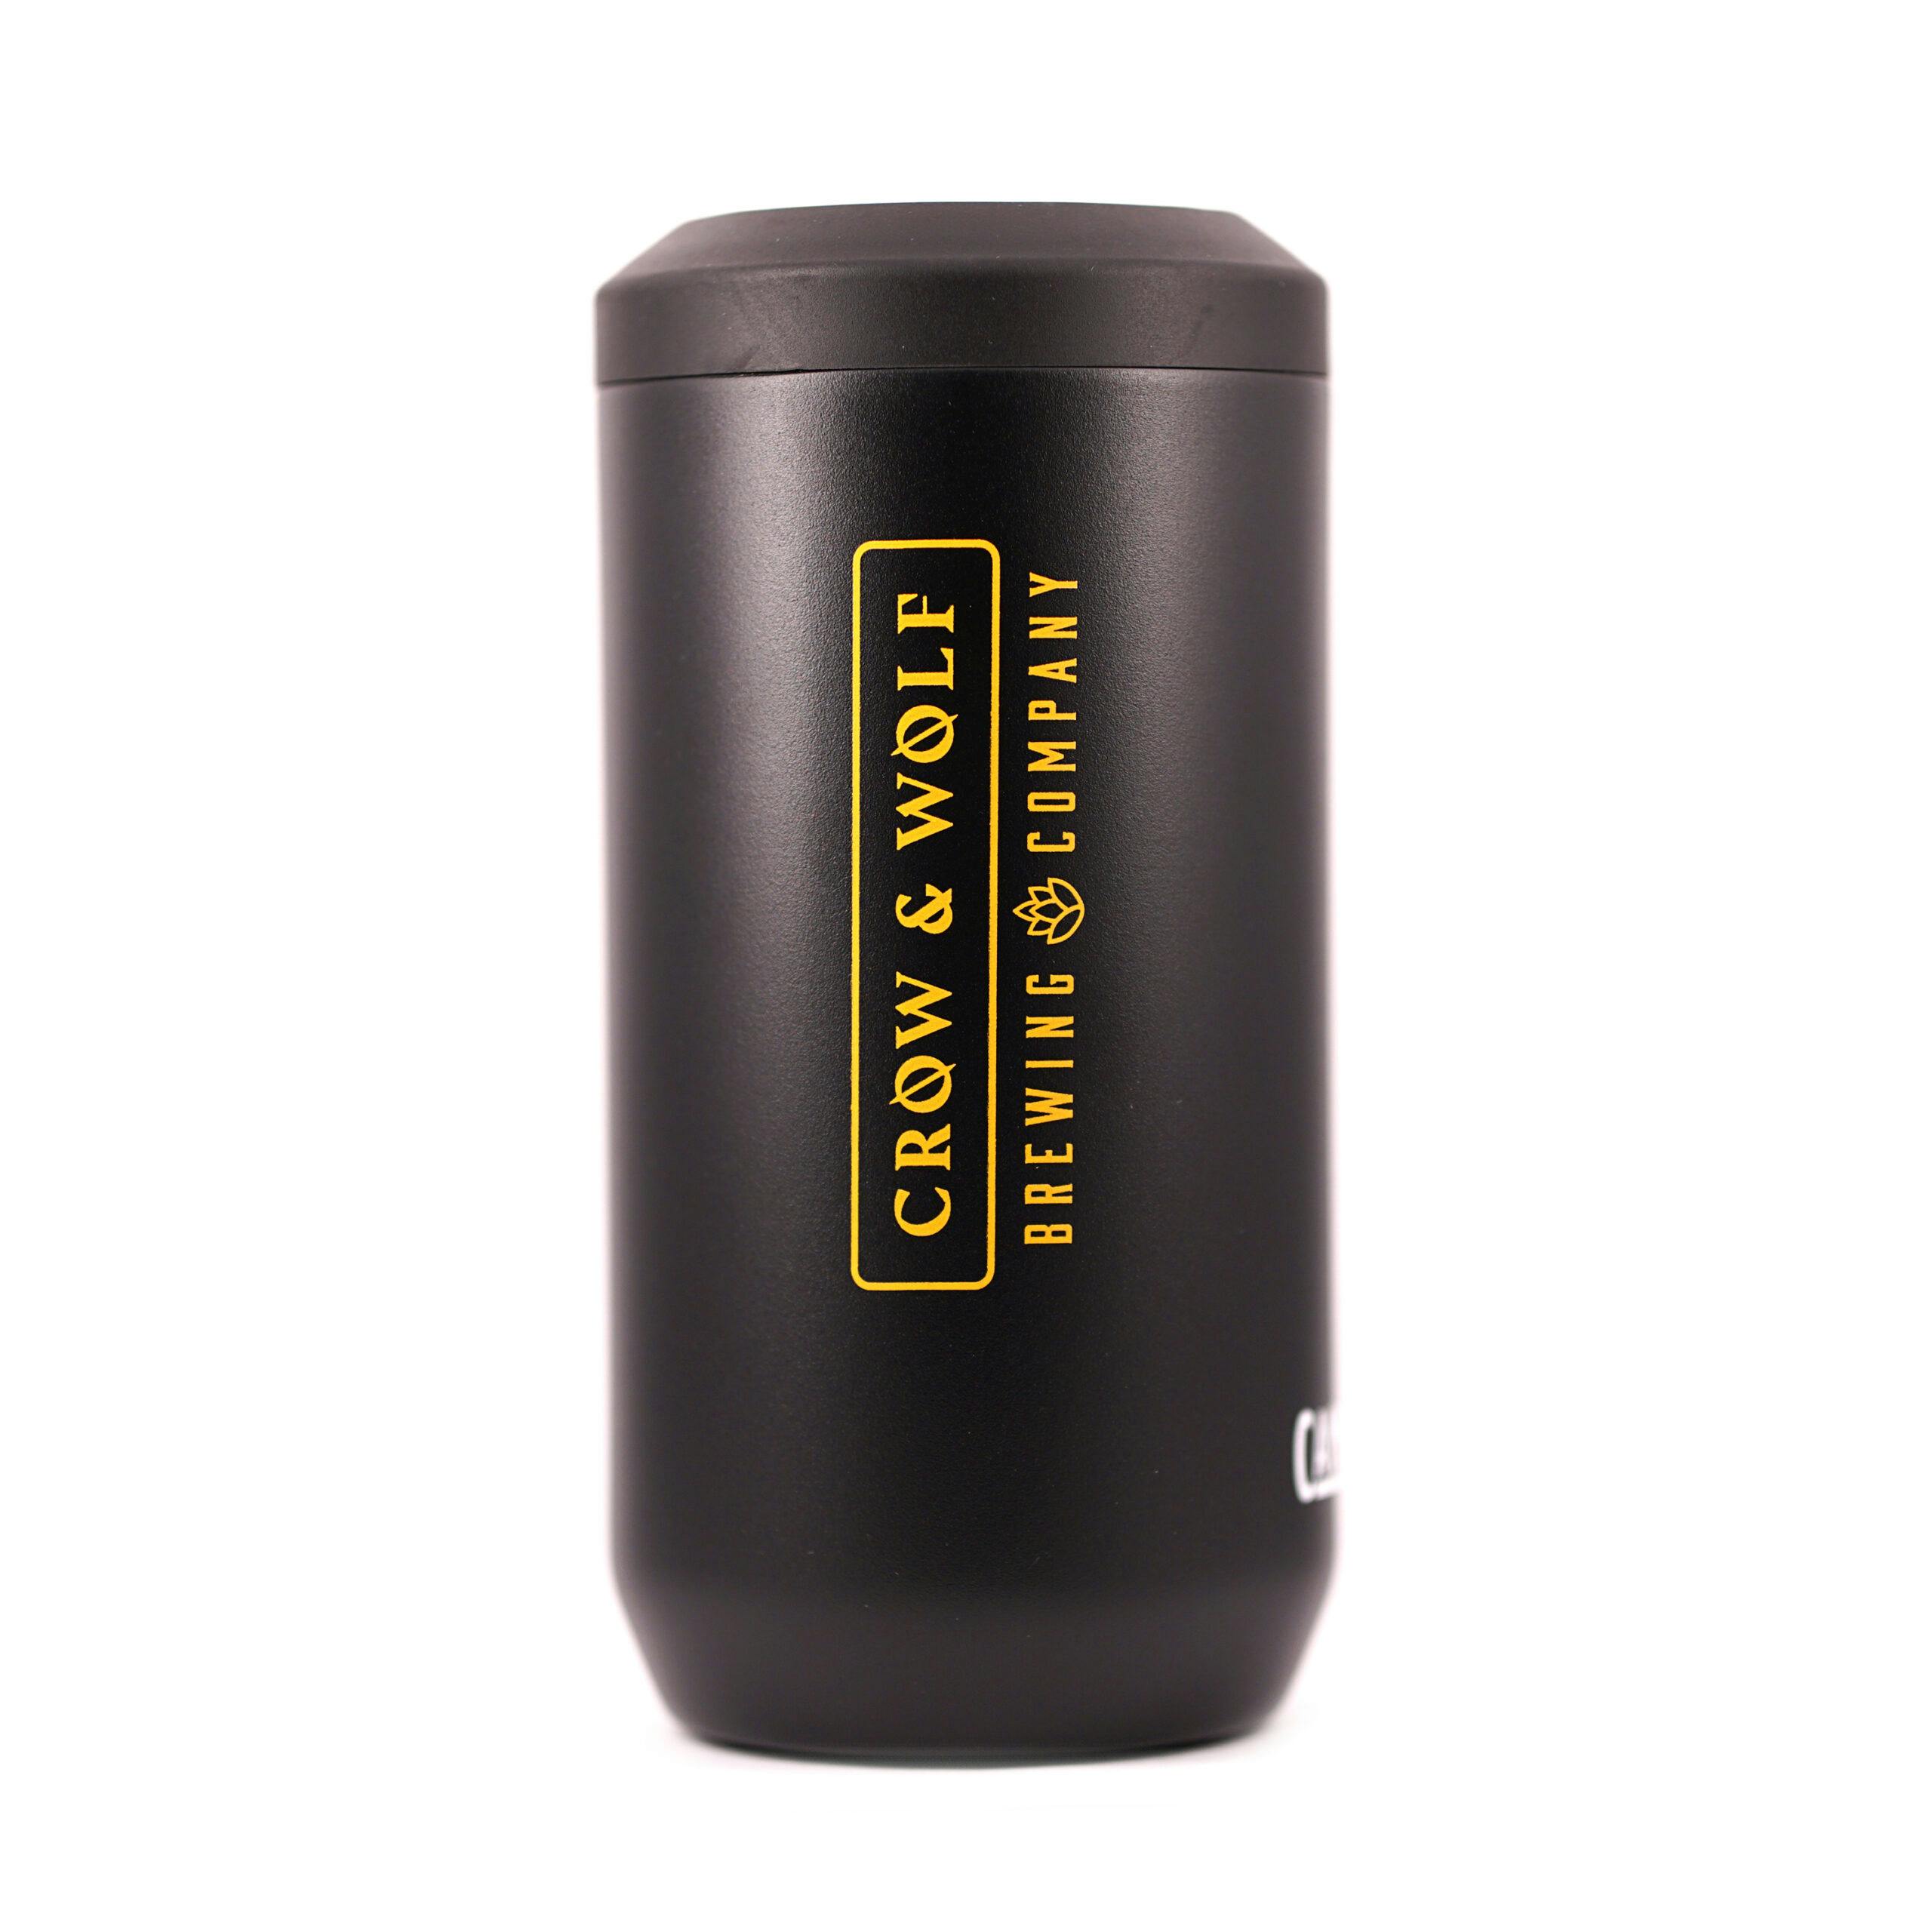 CamelBak 16oz Vacuum Insulated Stainless Steel Tall Can Cooler - Black